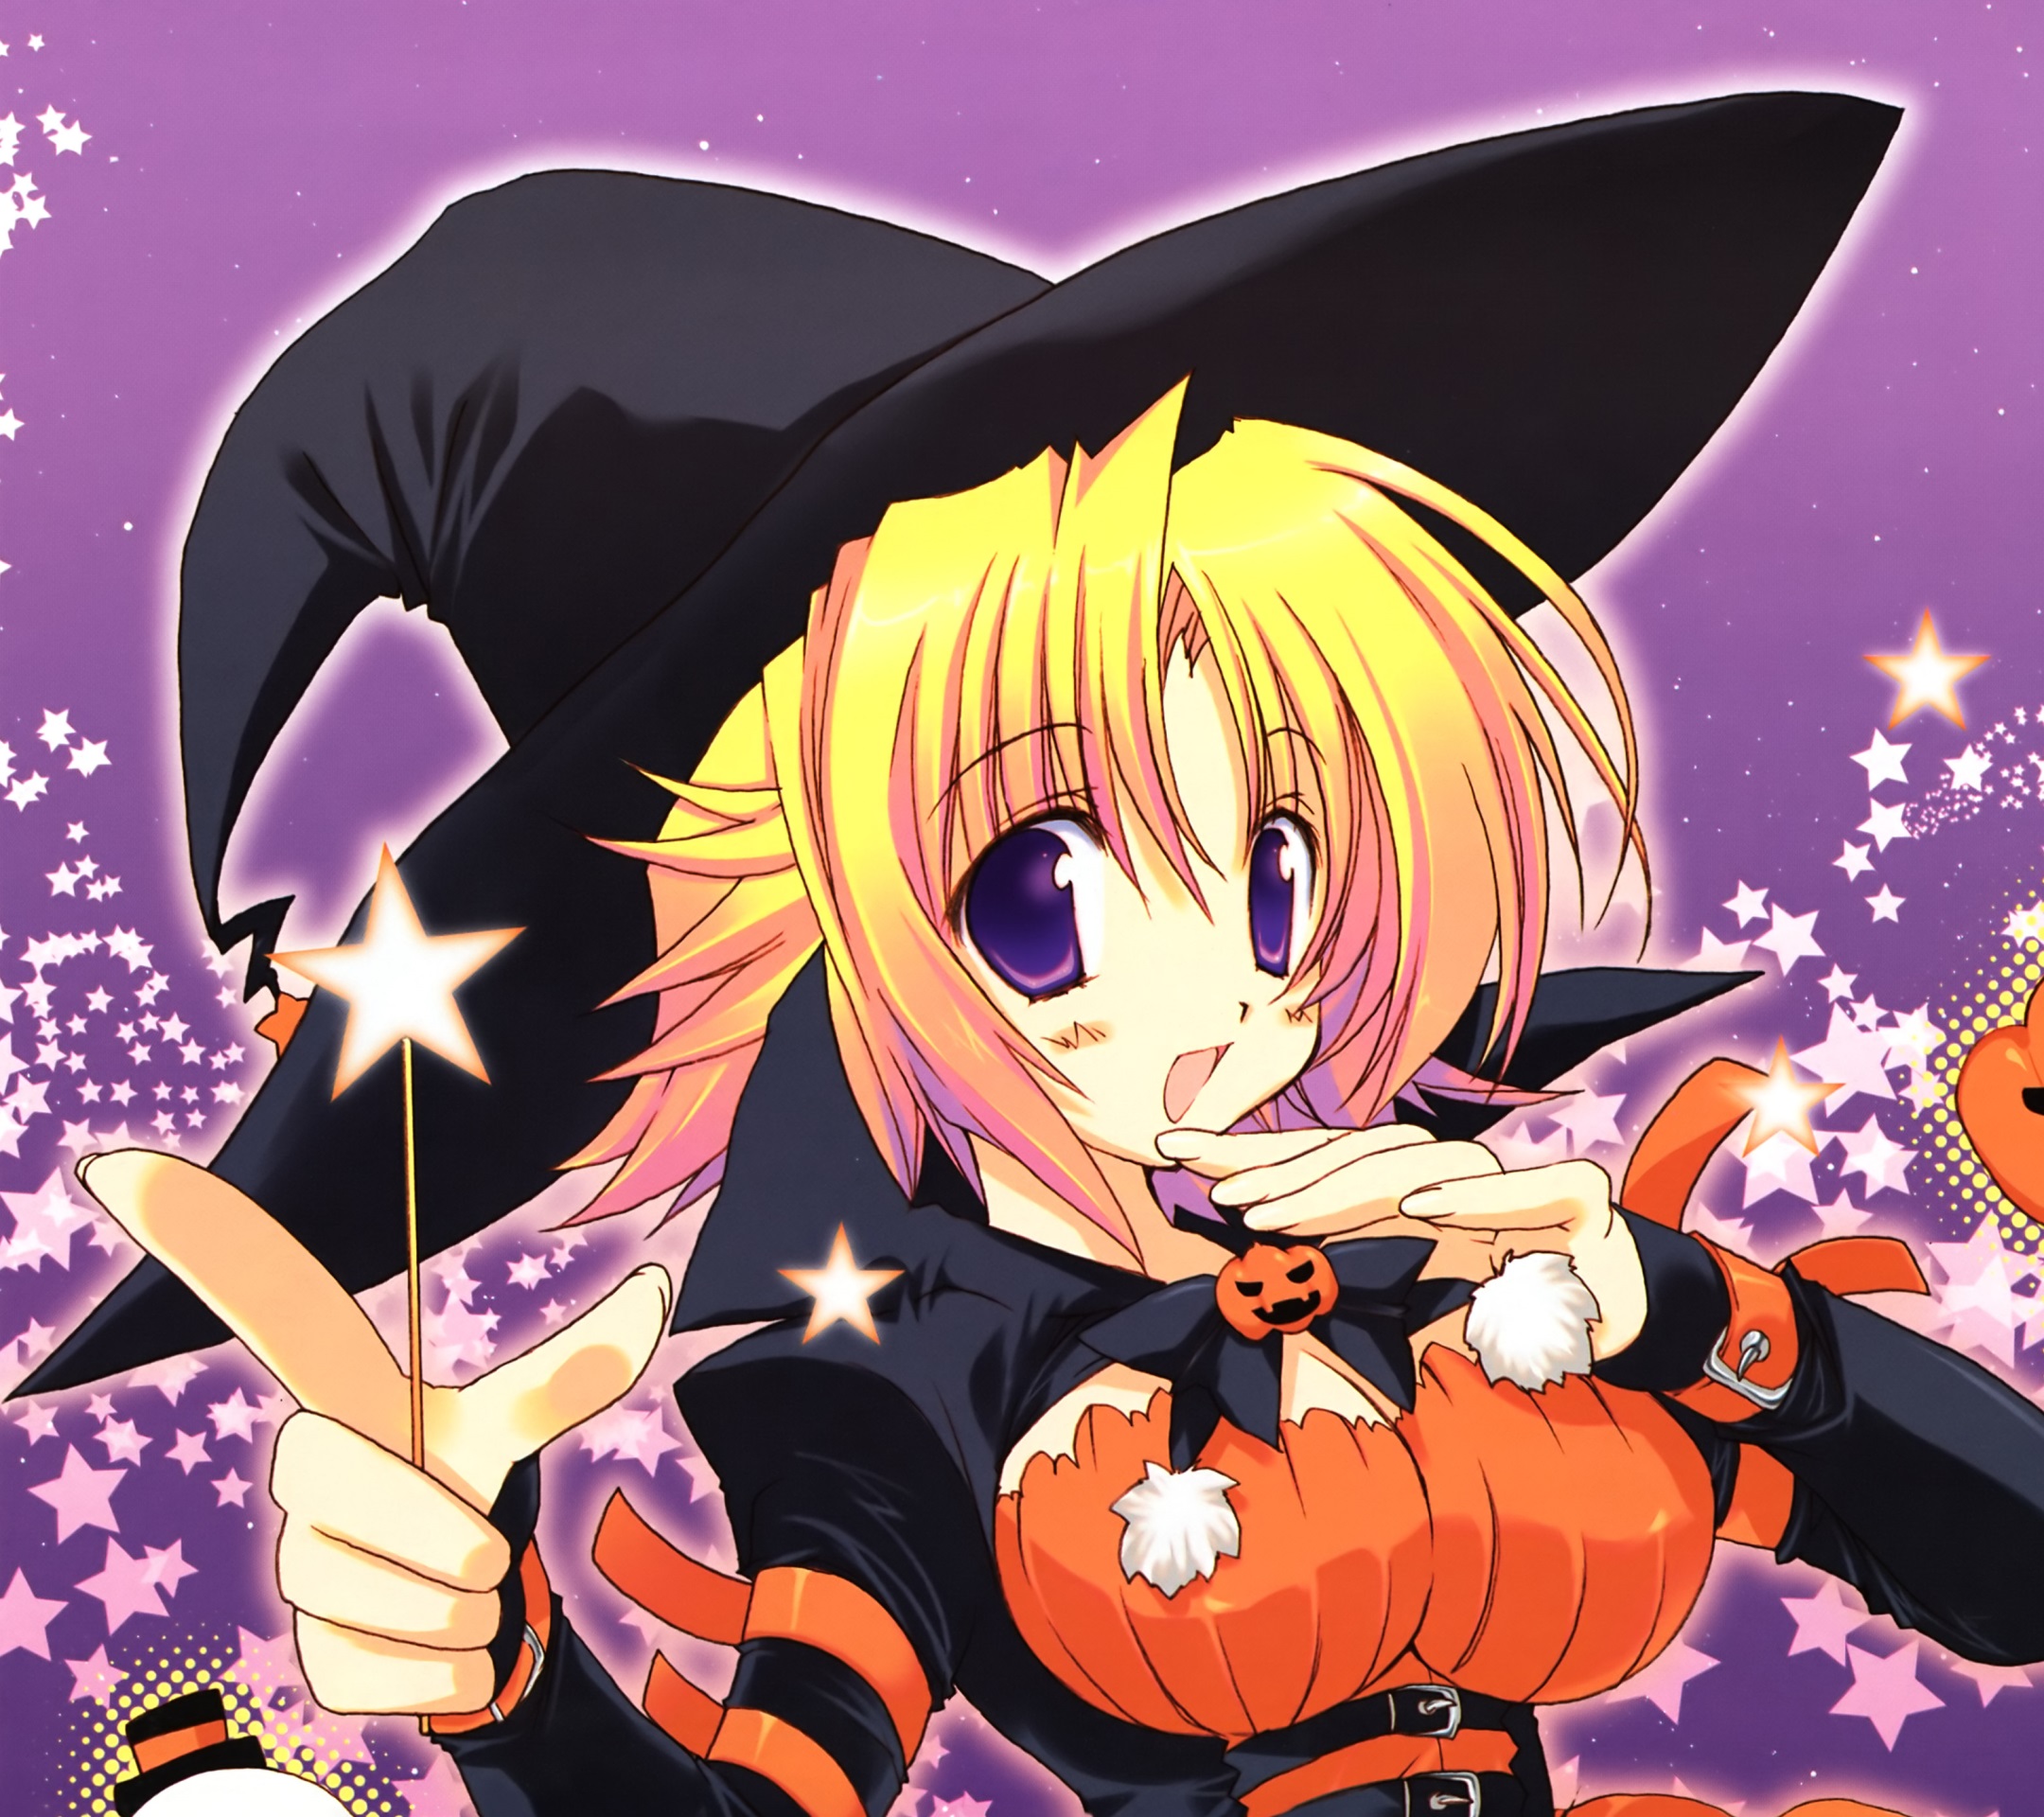 Free Download Anime Halloween 13android Wallpaper2160x19 8 2160x19 For Your Desktop Mobile Tablet Explore 73 Halloween Anime Wallpaper Anime Music Wallpaper Amazing Anime Wallpapers Anime Background Wallpaper